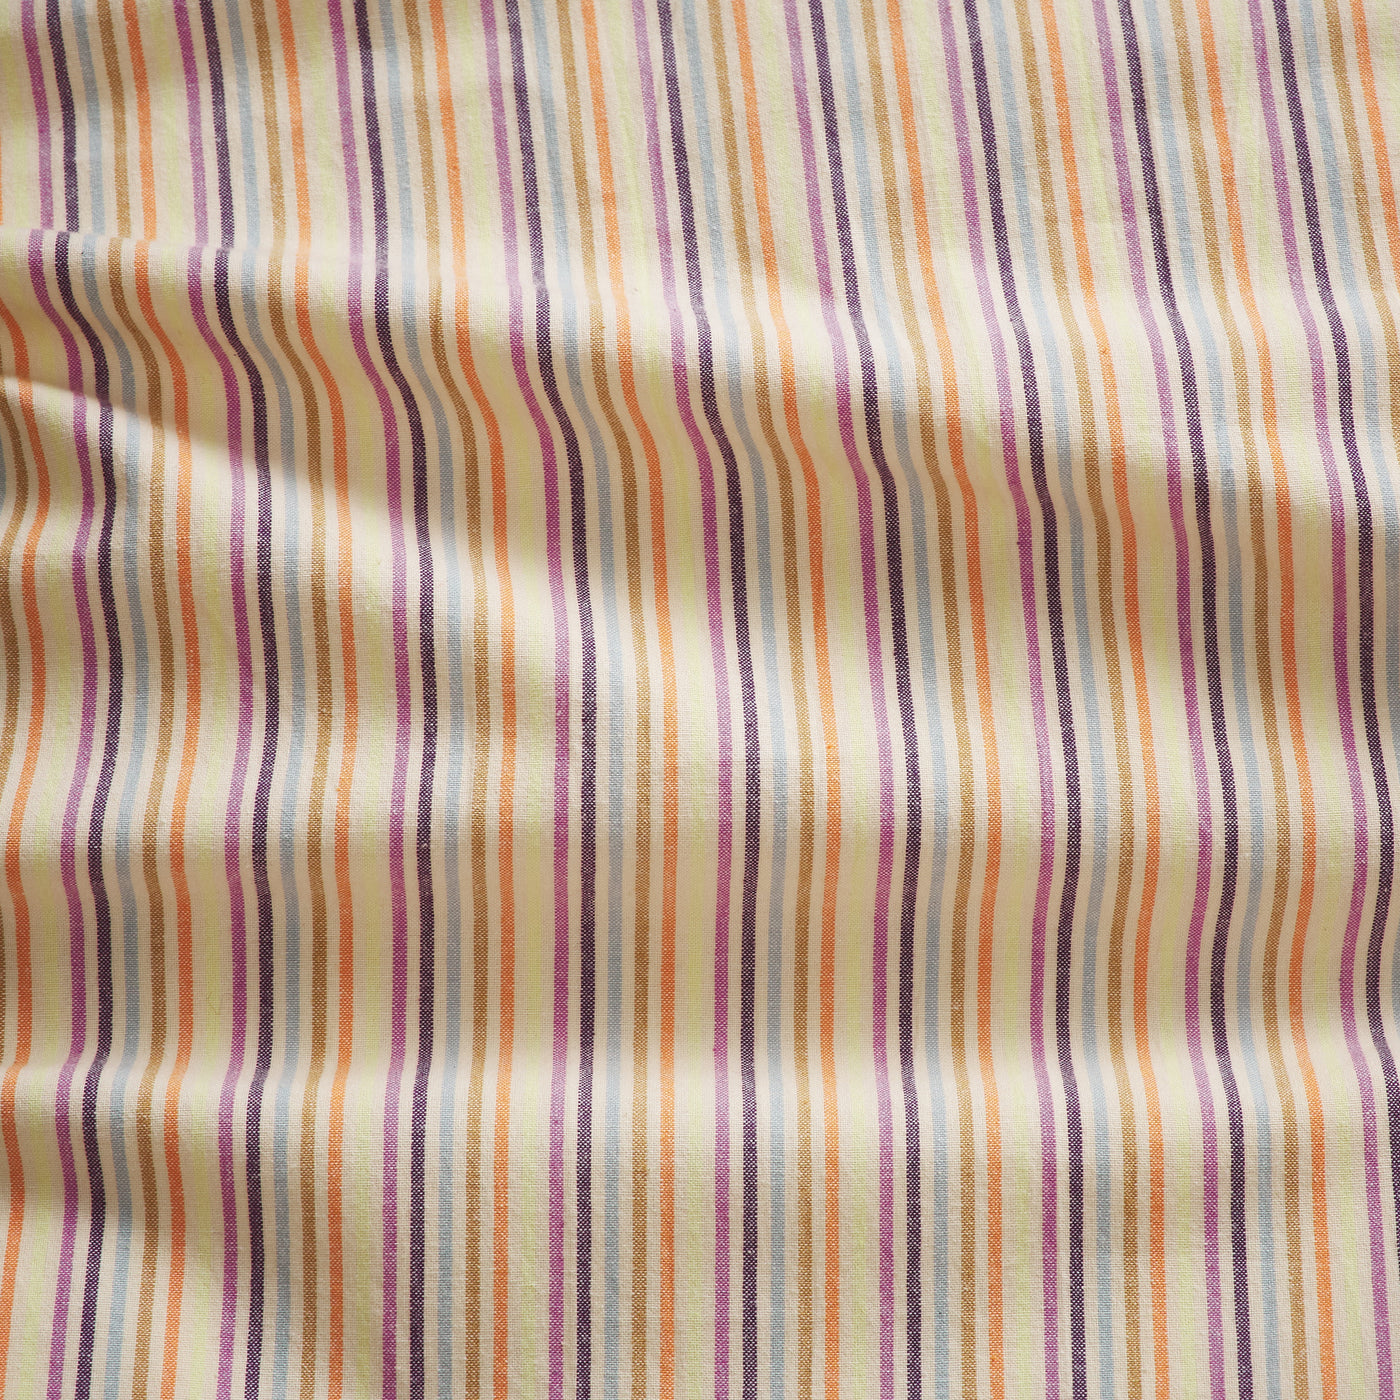 Romsey Cotton Fitted Sheet Cot